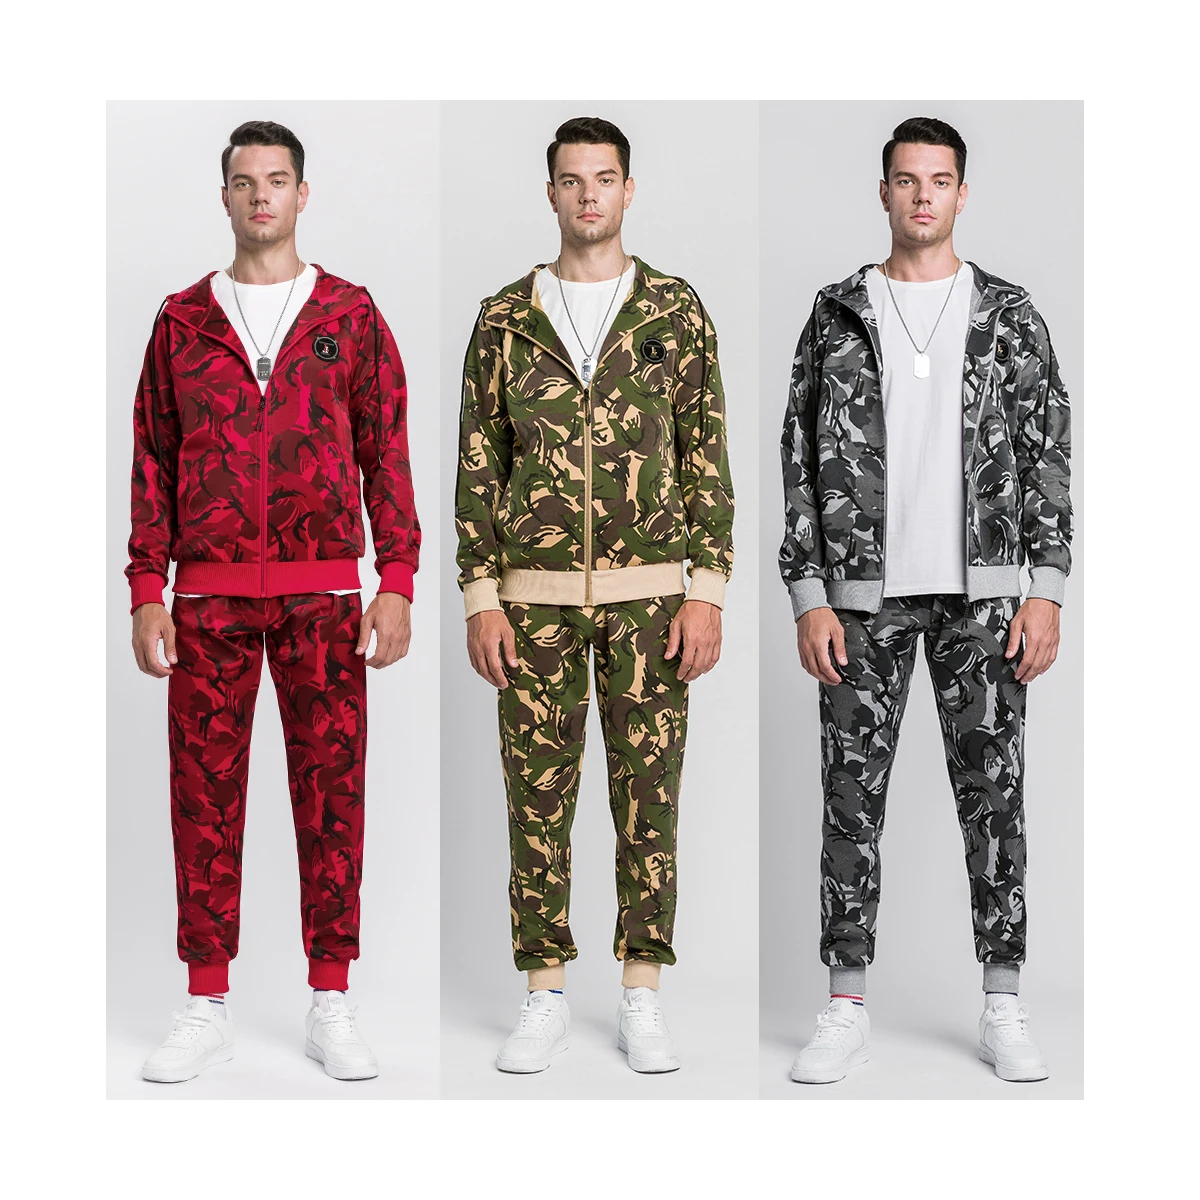 

JS58 new arrivals camouflage print winter sport jogging wear casual mens sweatsuit sets 2 piece sweatpants and hoodie set, As shown